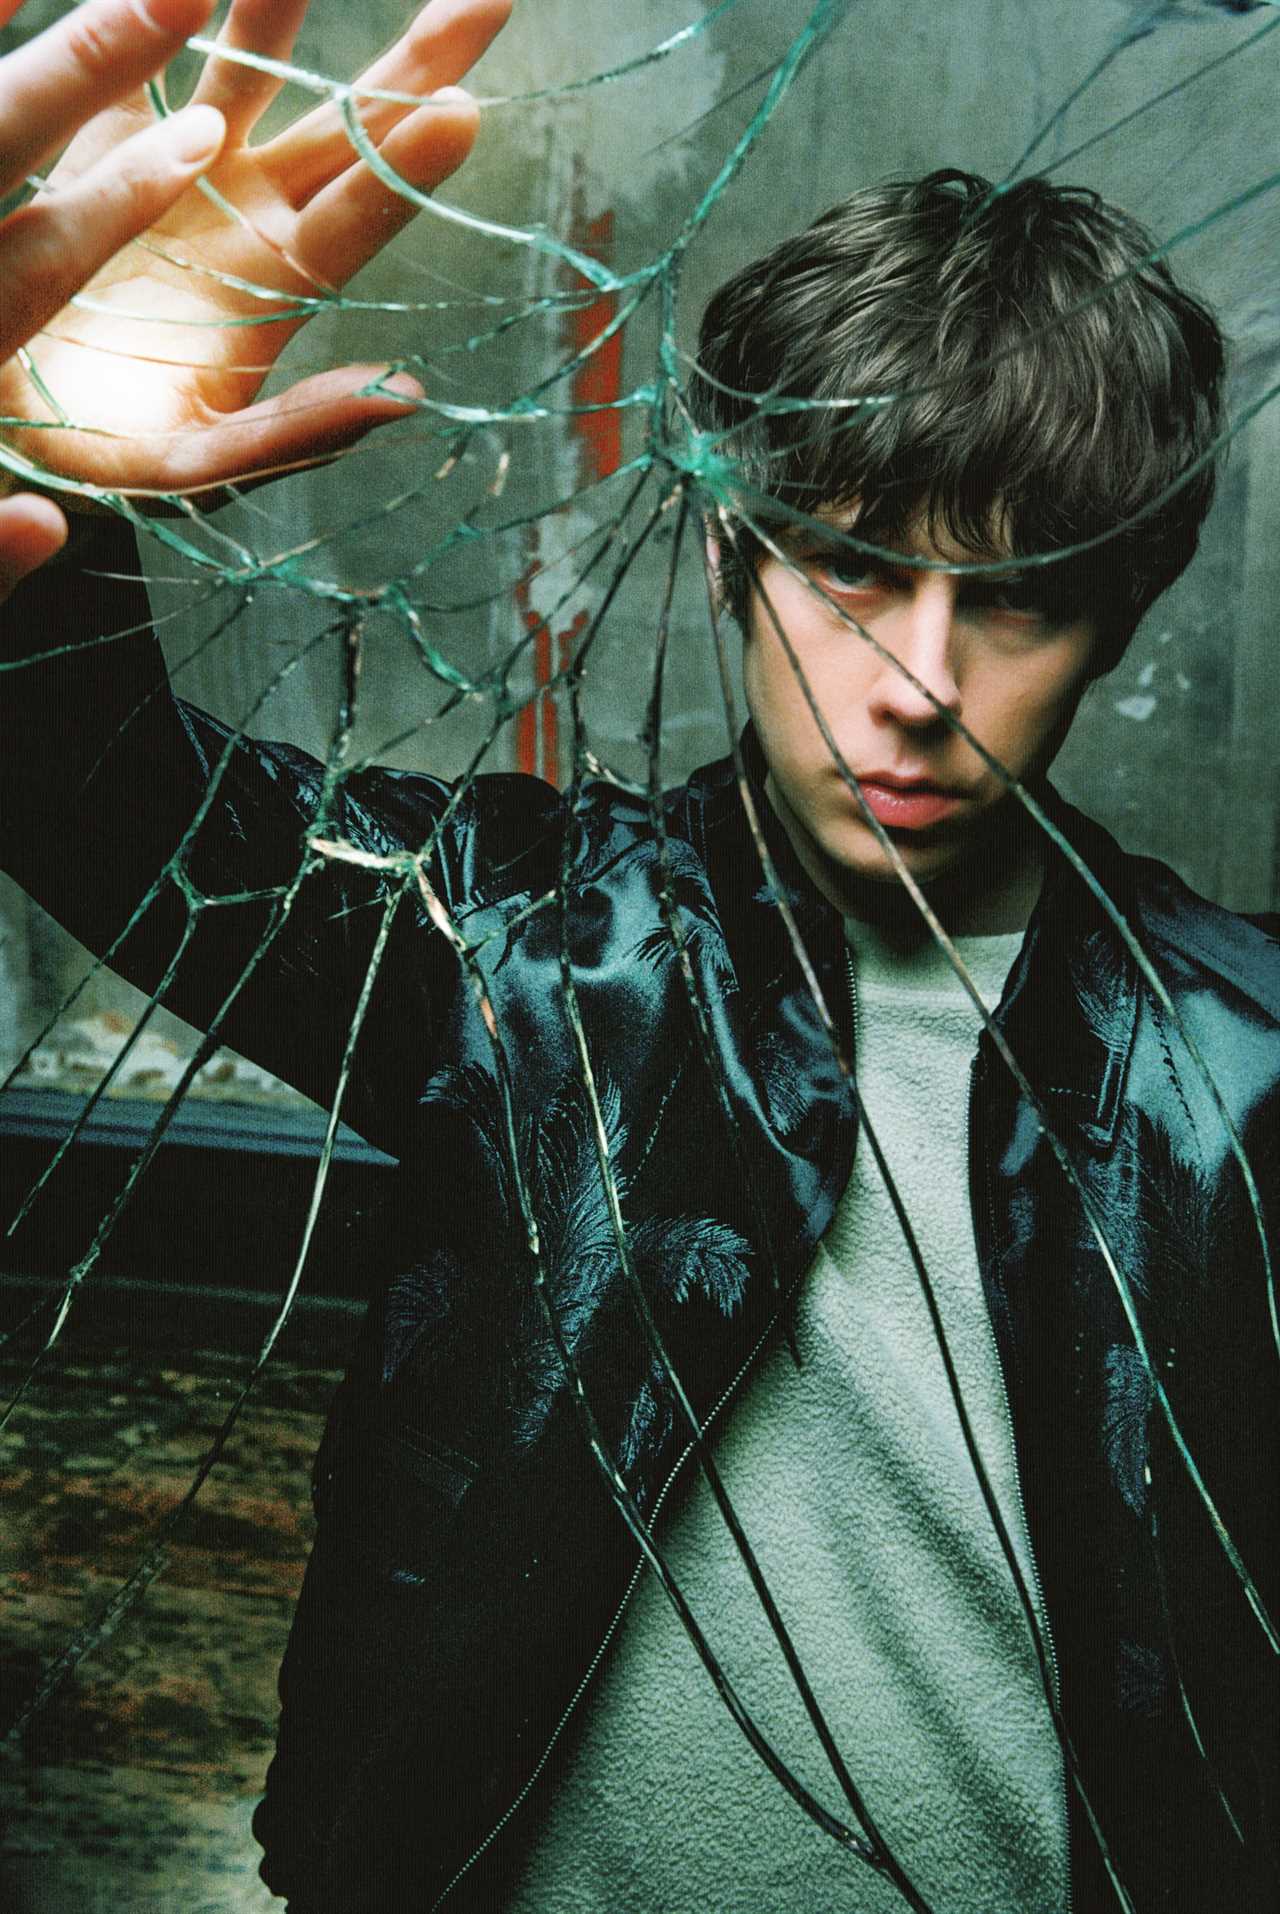 Jake Bugg on his musical career, writing positive music in lockdown and football sponsorship